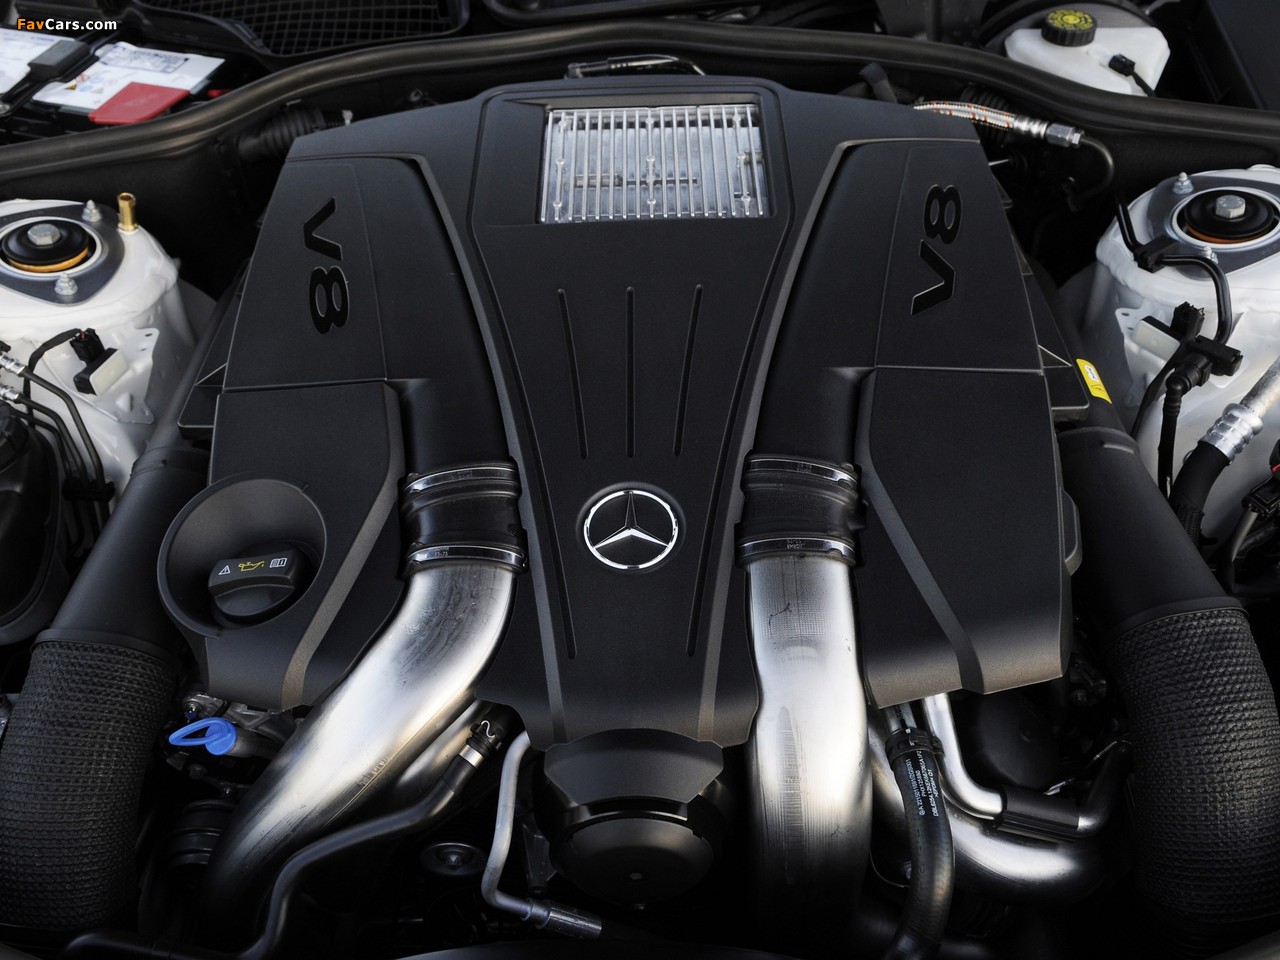 Pictures of Mercedes-Benz CL 500 BlueEfficiency (S216) 2010 (1280 x 960)